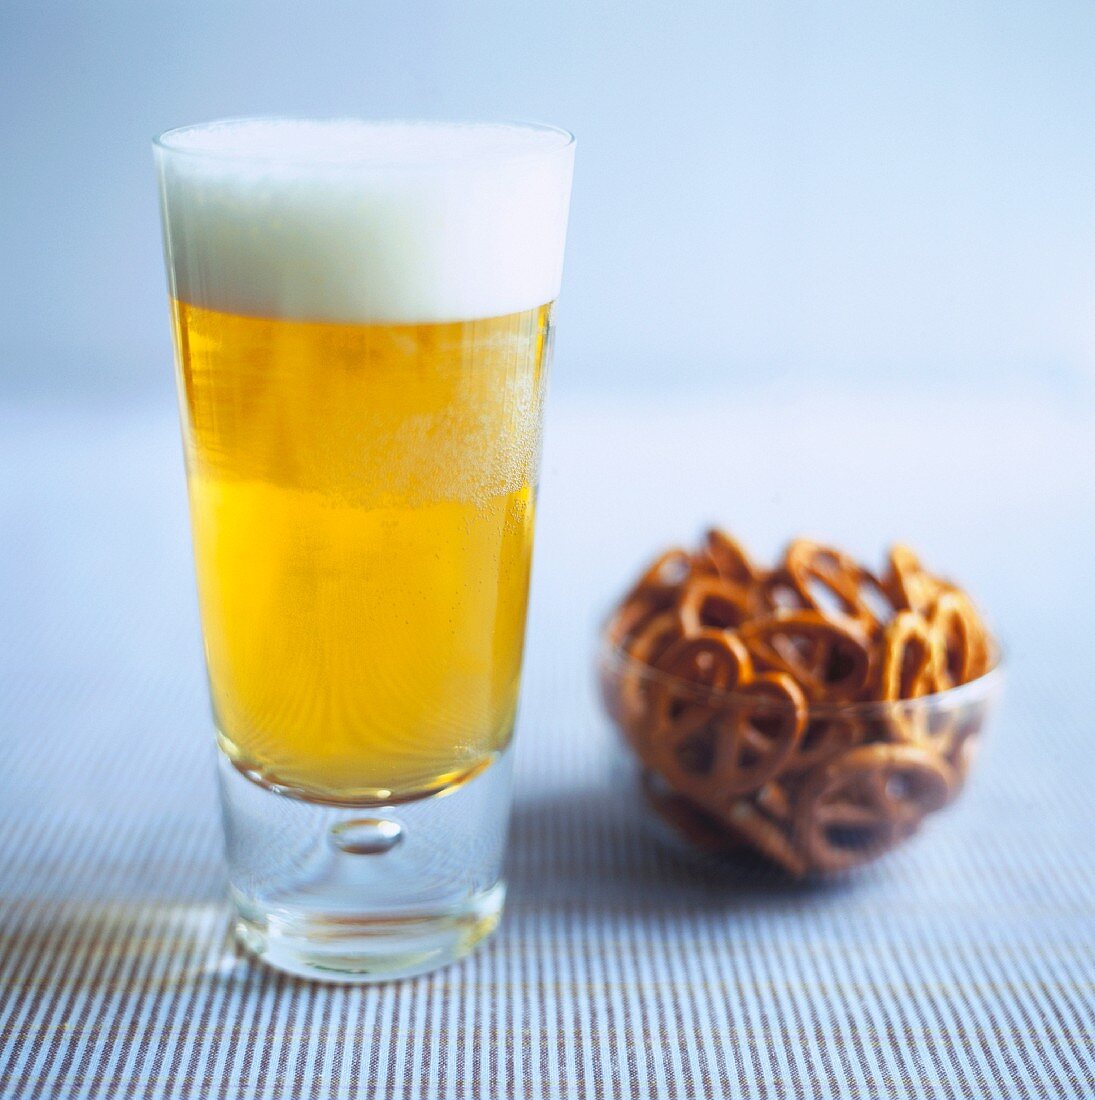 A glass of lager and a bowl of pretzels